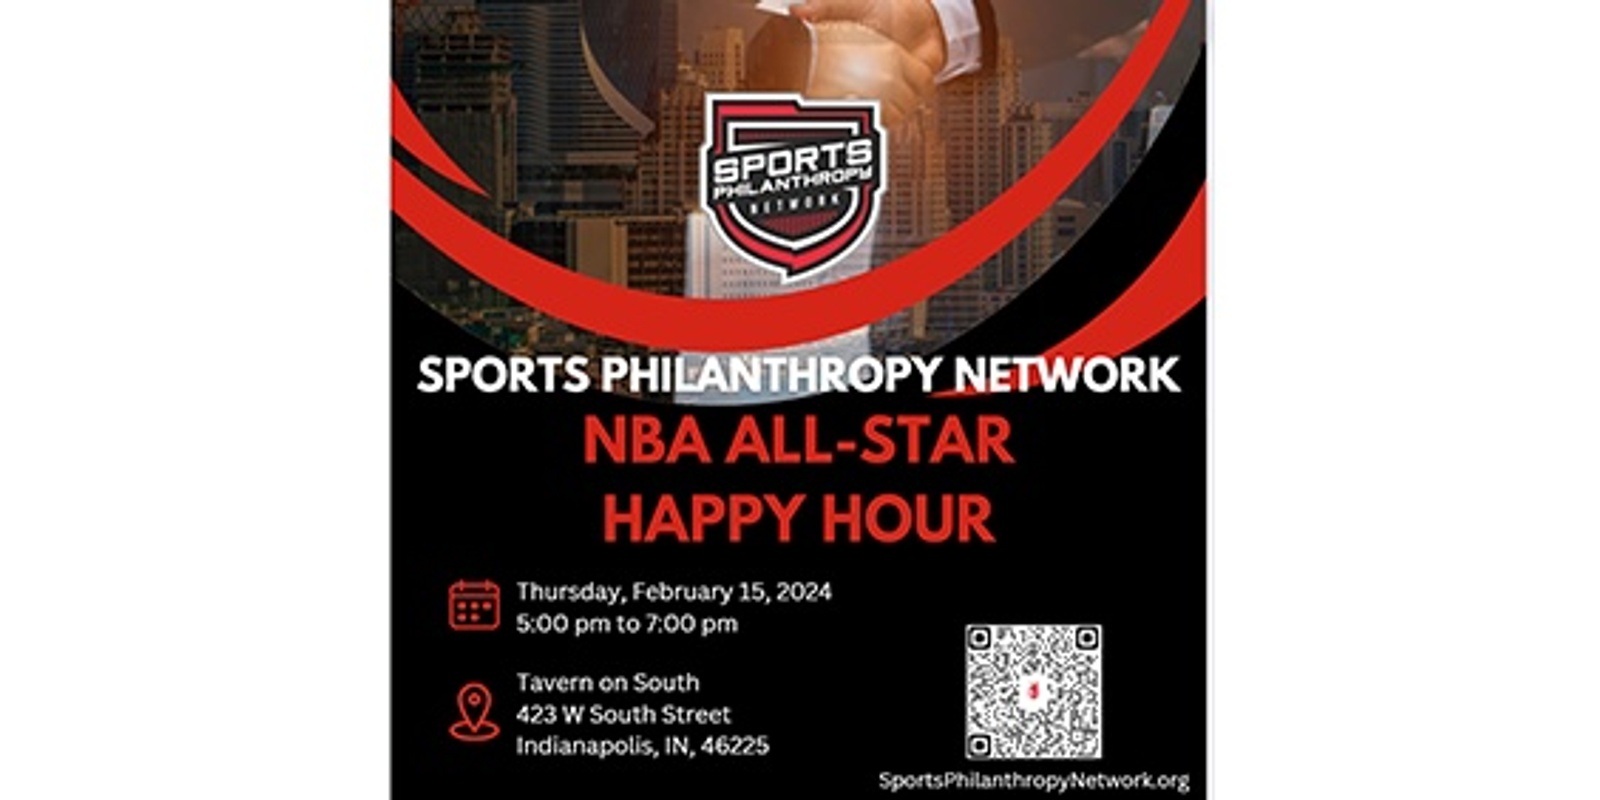 Banner image for Sports Philanthropy Network NBA All-Star Indianapolis (2-15-24)